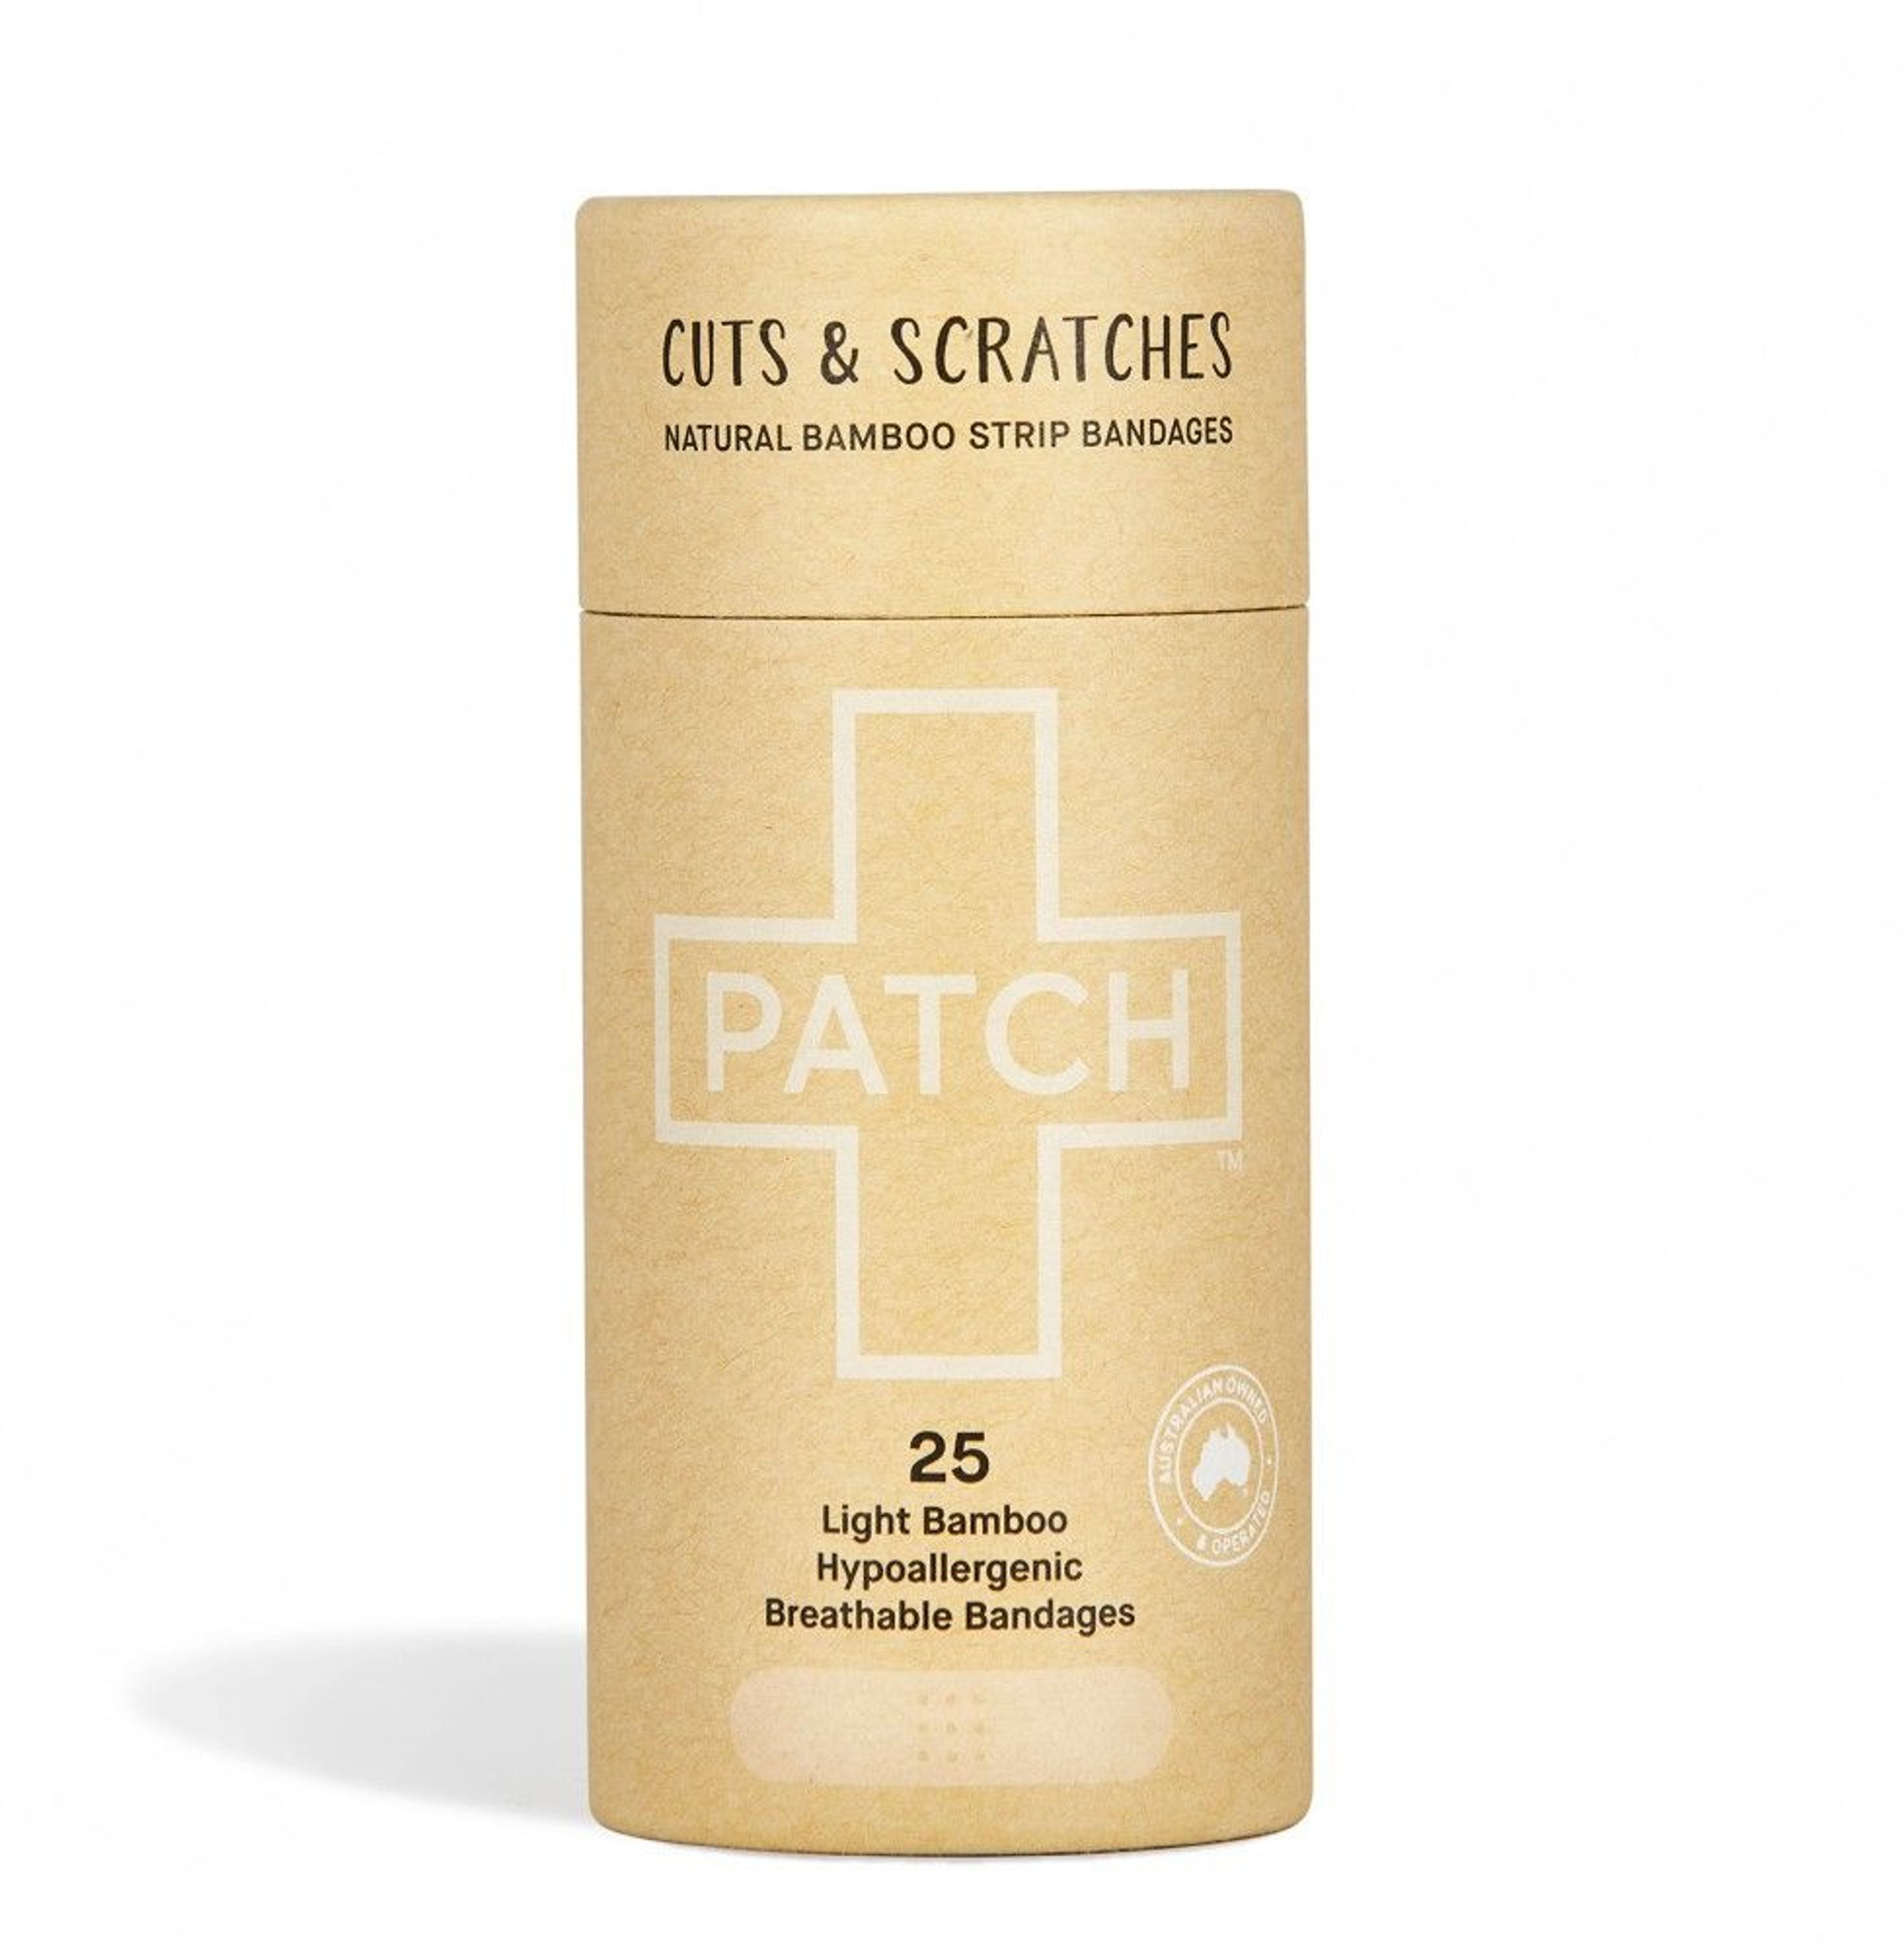 Patch plaster - Neutral - 25s brown